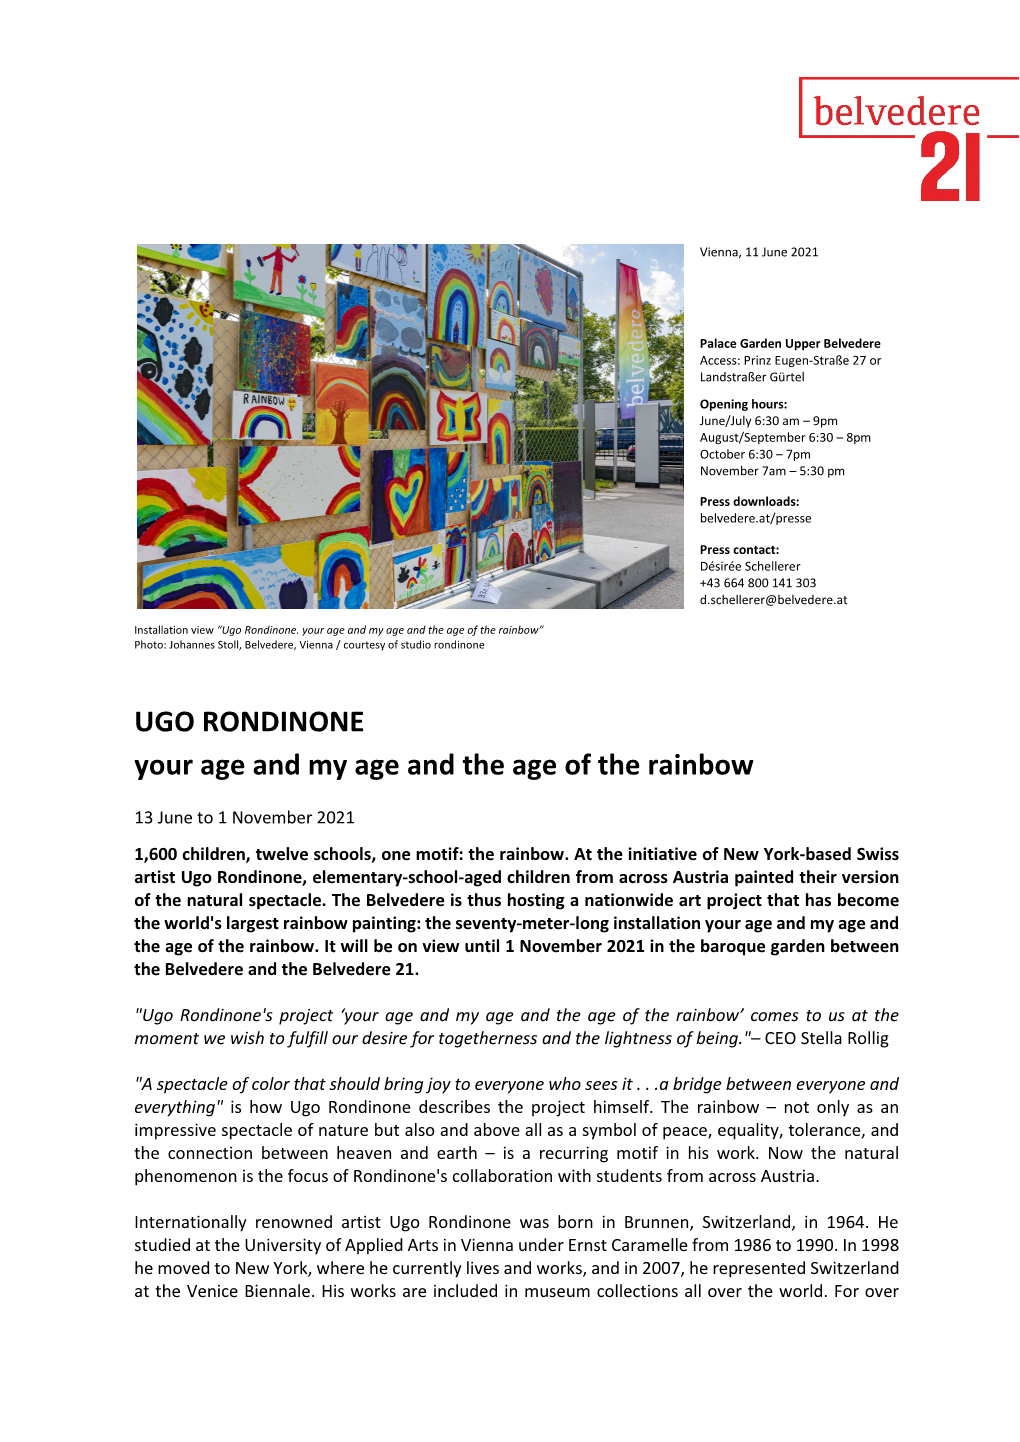 UGO RONDINONE Your Age and My Age and the Age of the Rainbow